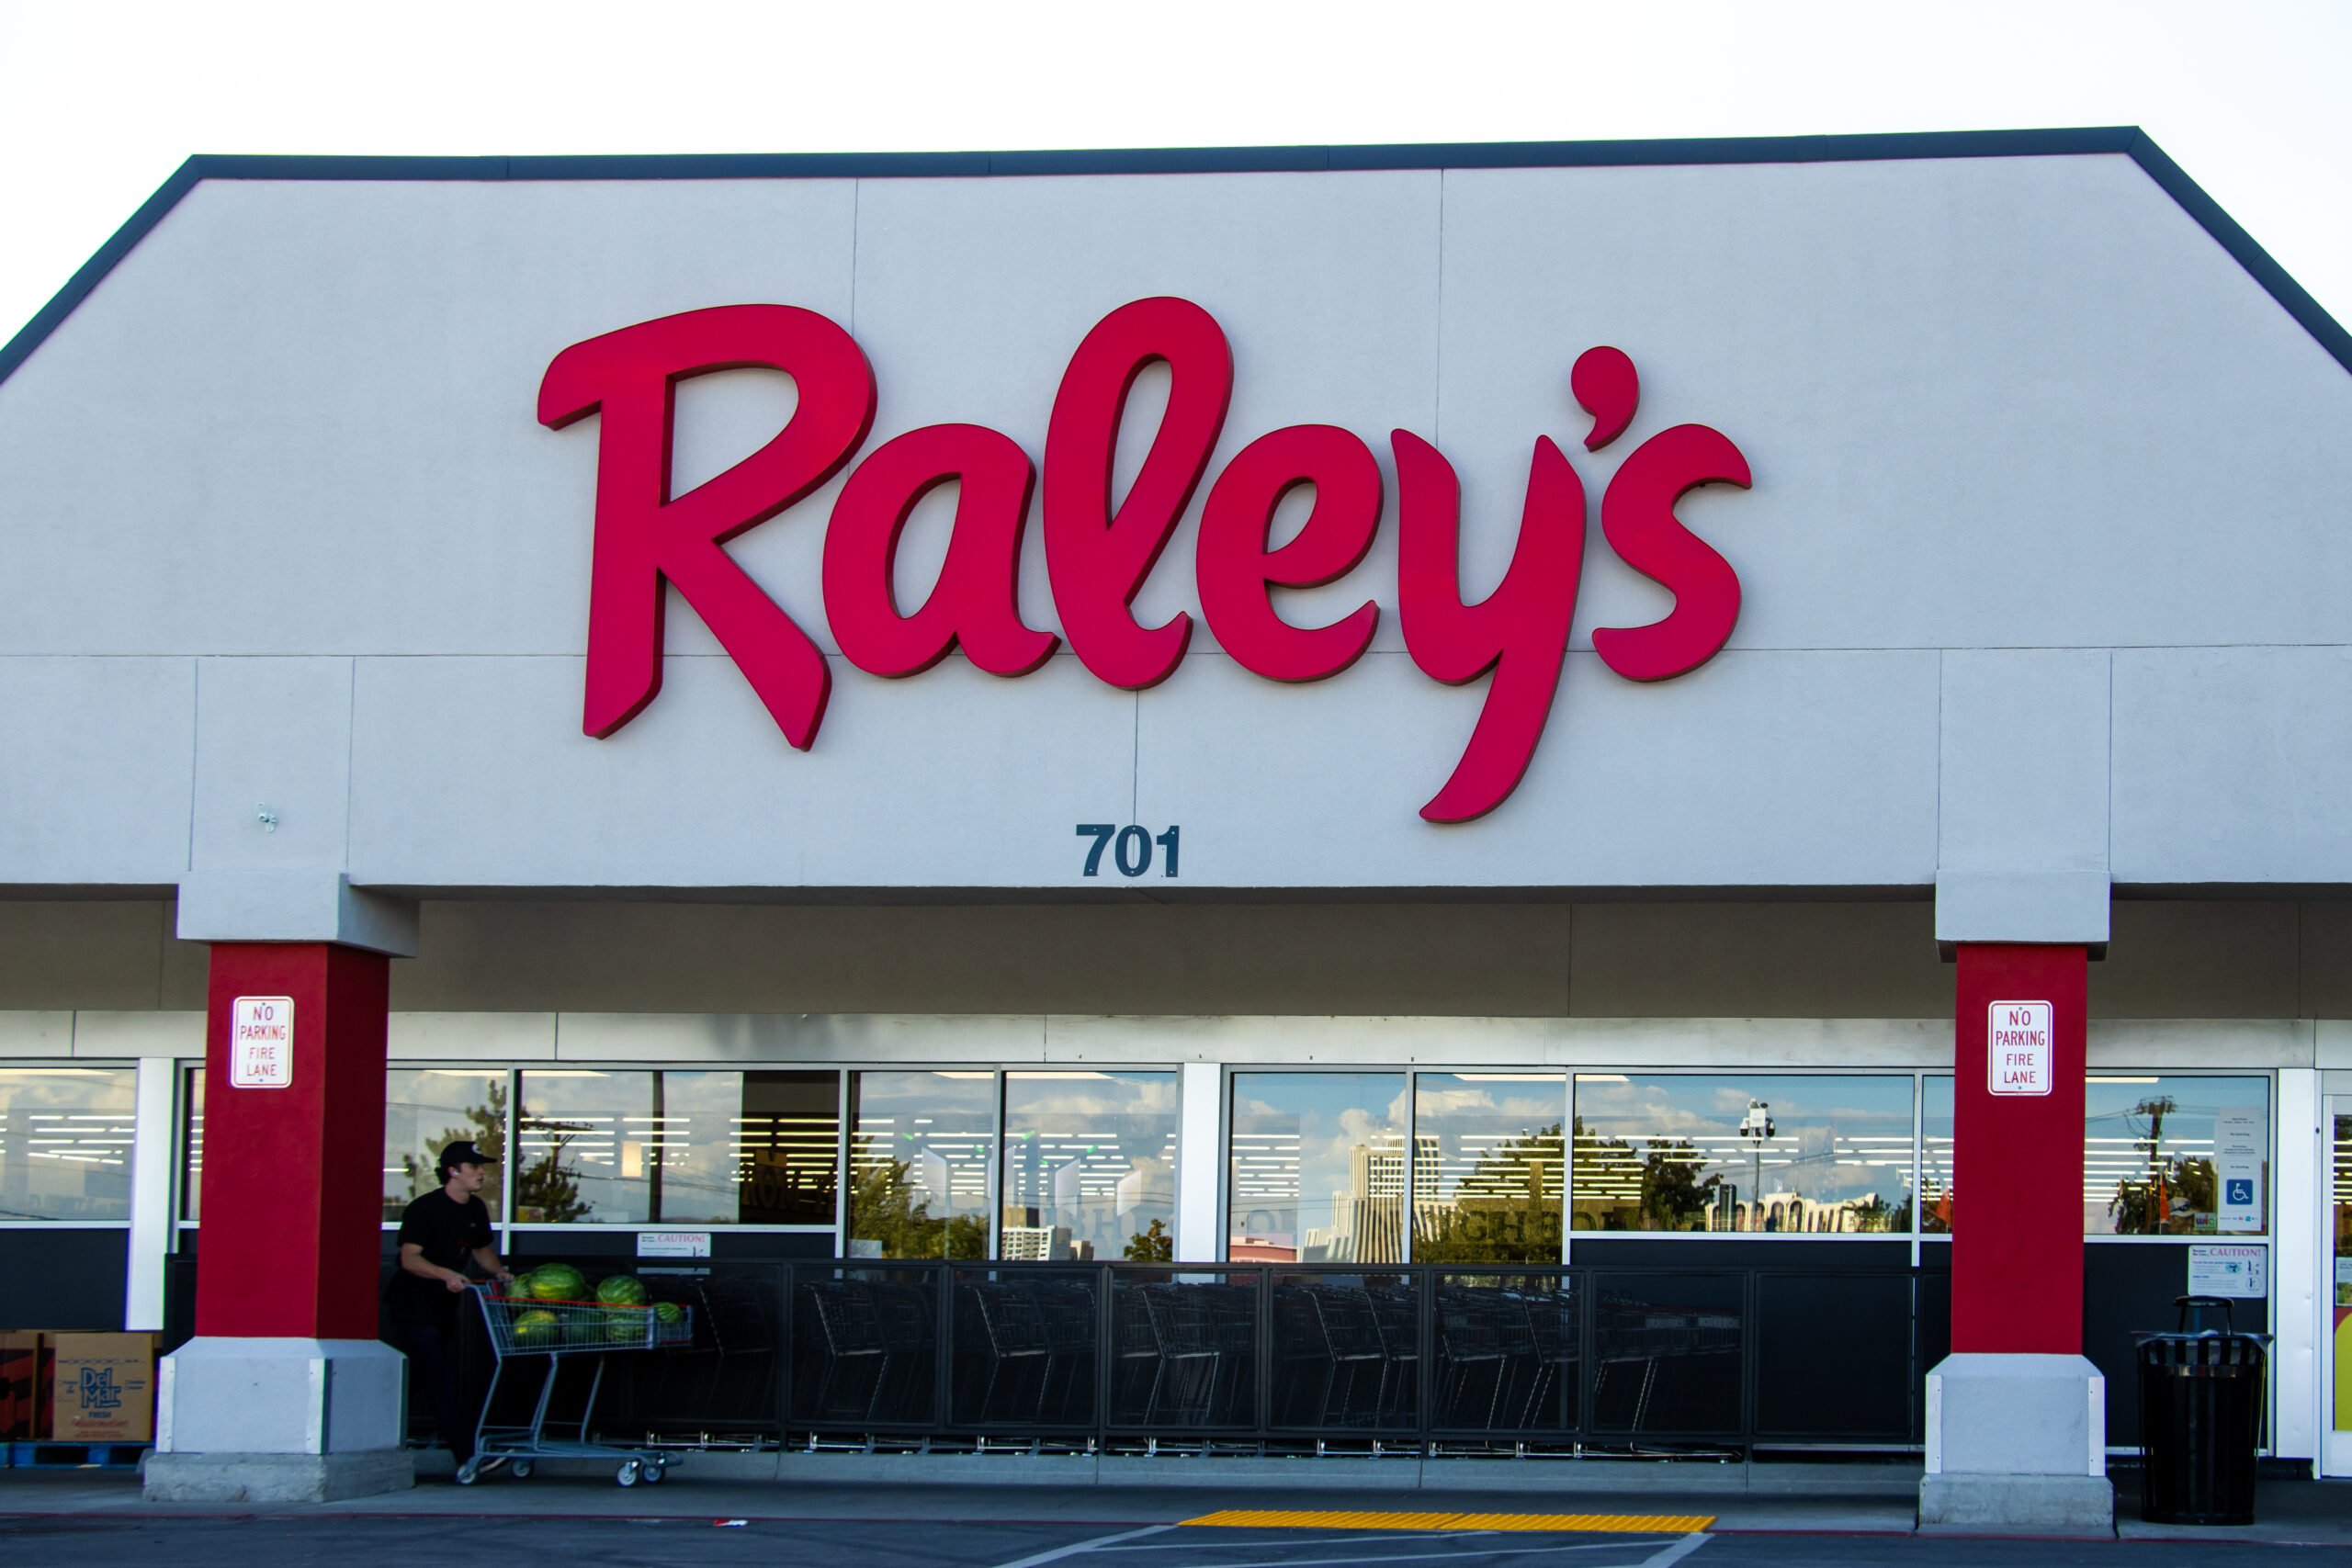 UNR introduces new Raley’s for groceries discount for staff and students